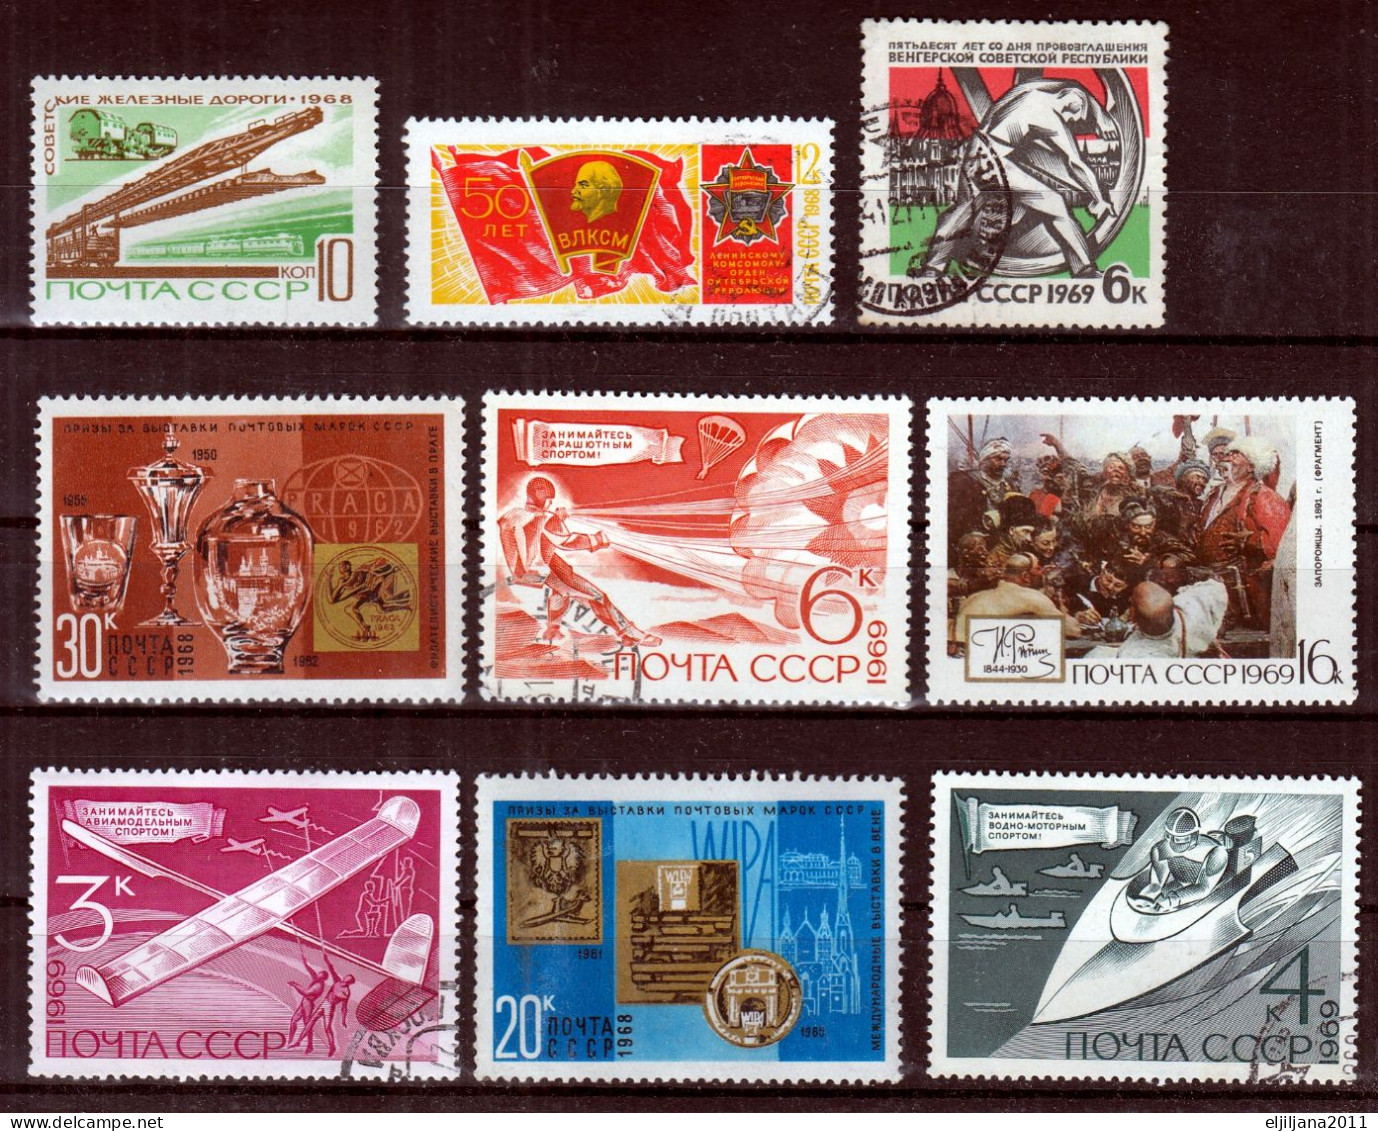 Action !! SALE !! 50 % OFF !! ⁕ Soviet Union / Russia 1968/69 ⁕ Small Collection / Lot Of 15 Stamps MNH & Used - Scan - Sammlungen